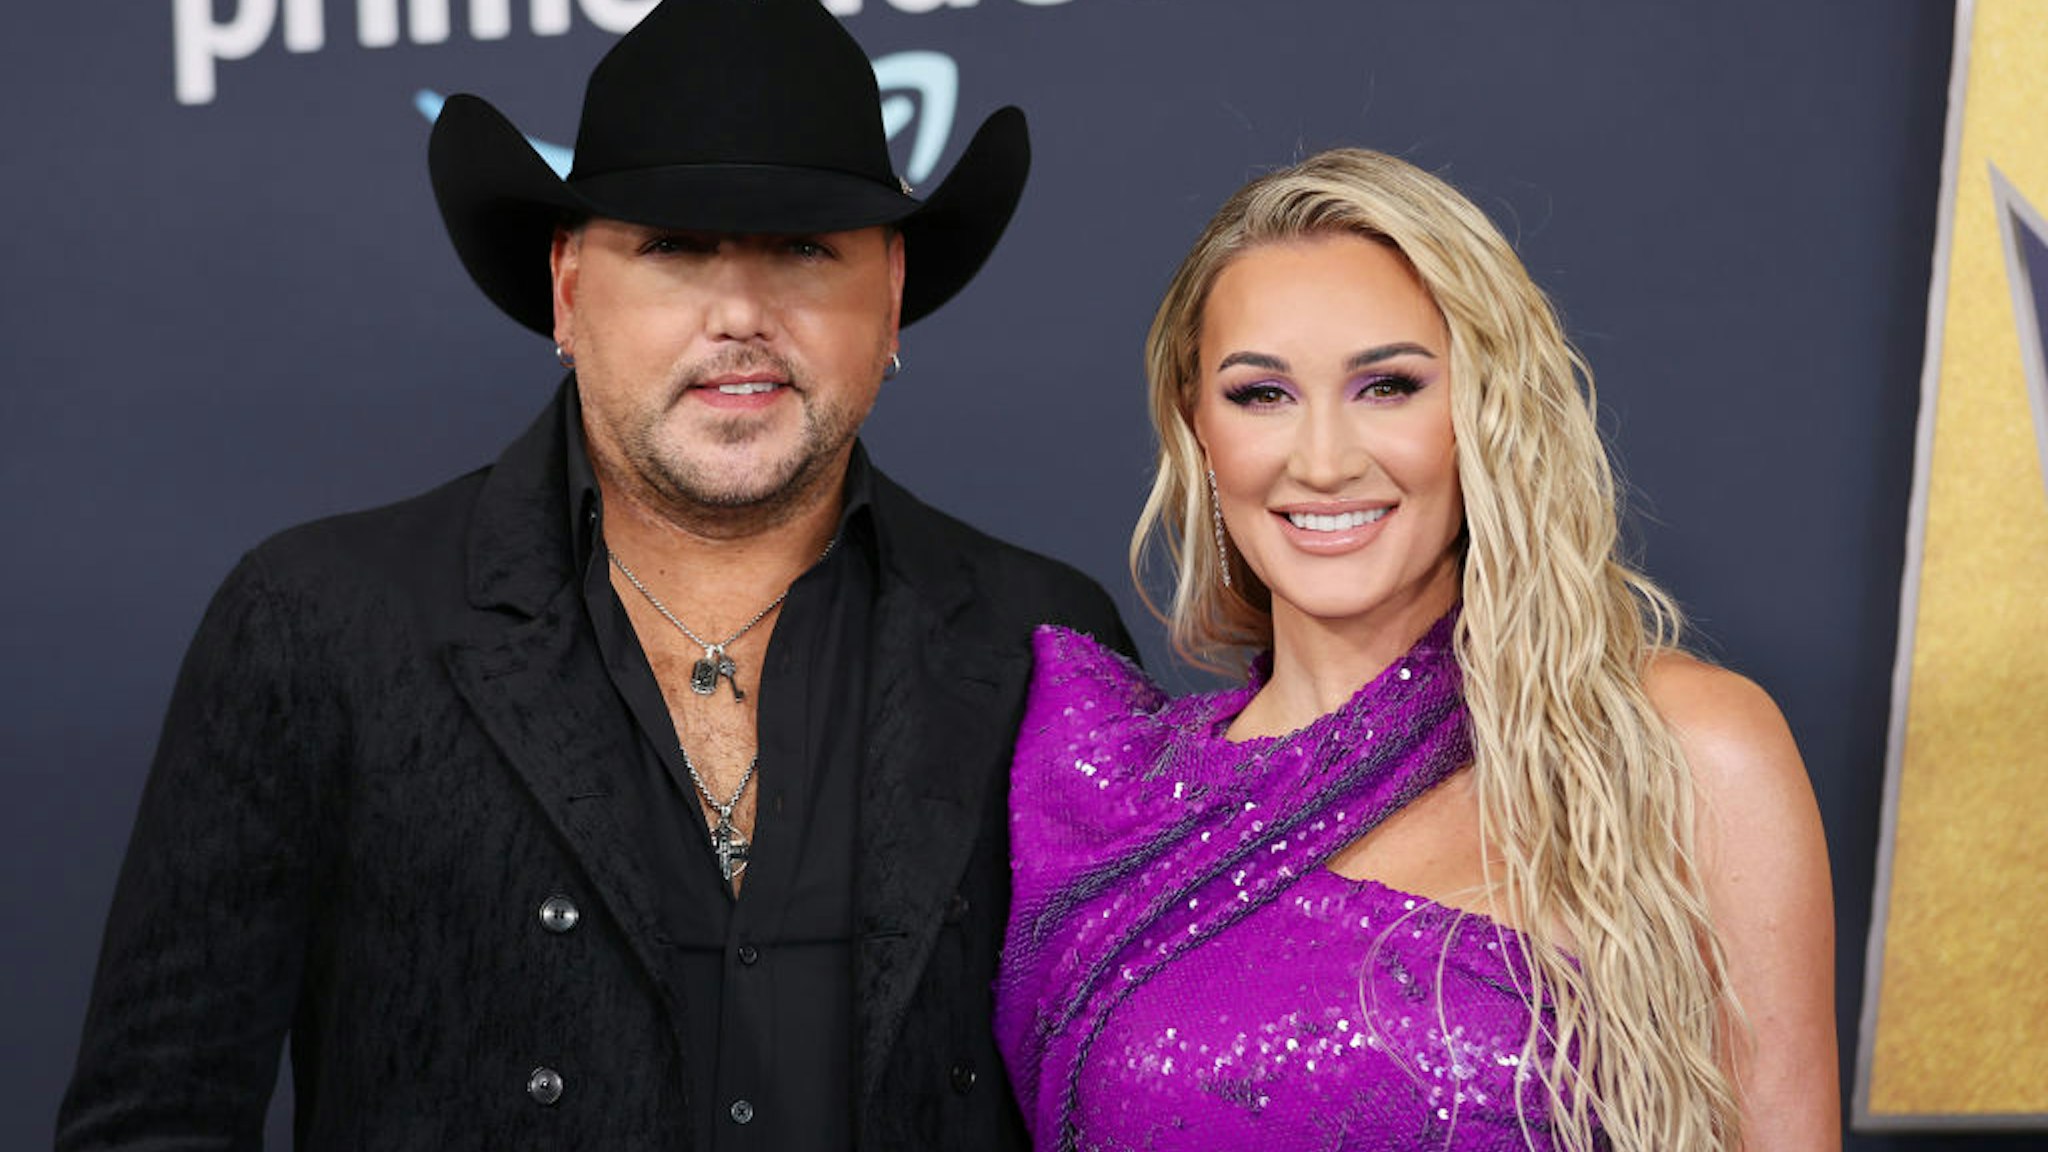 Jason Aldean and Brittany Kerr attend the 57th Academy of Country Music Awards at Allegiant Stadium on March 07, 2022 in Las Vegas, Nevada